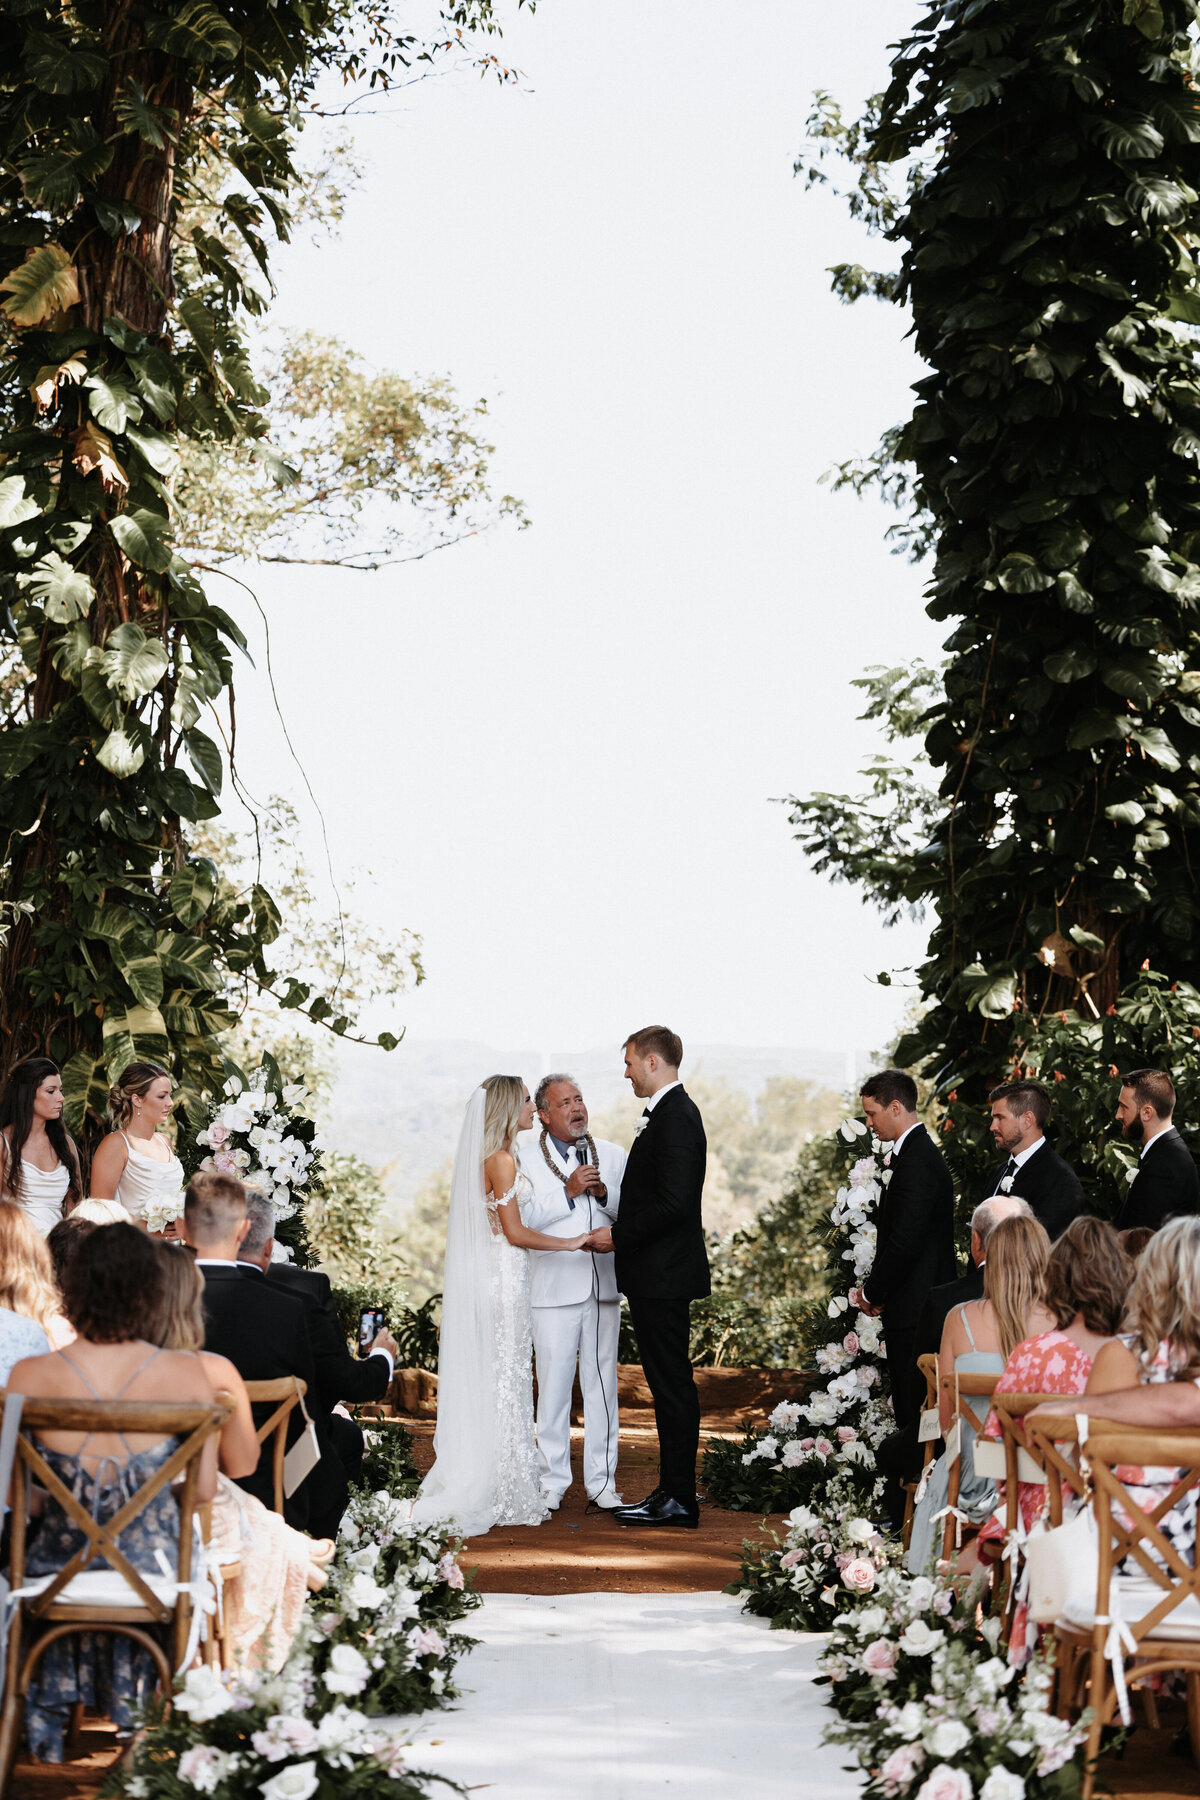 Elopement Photography, wedding ceremony bride and groom looking at each other while guests watch them